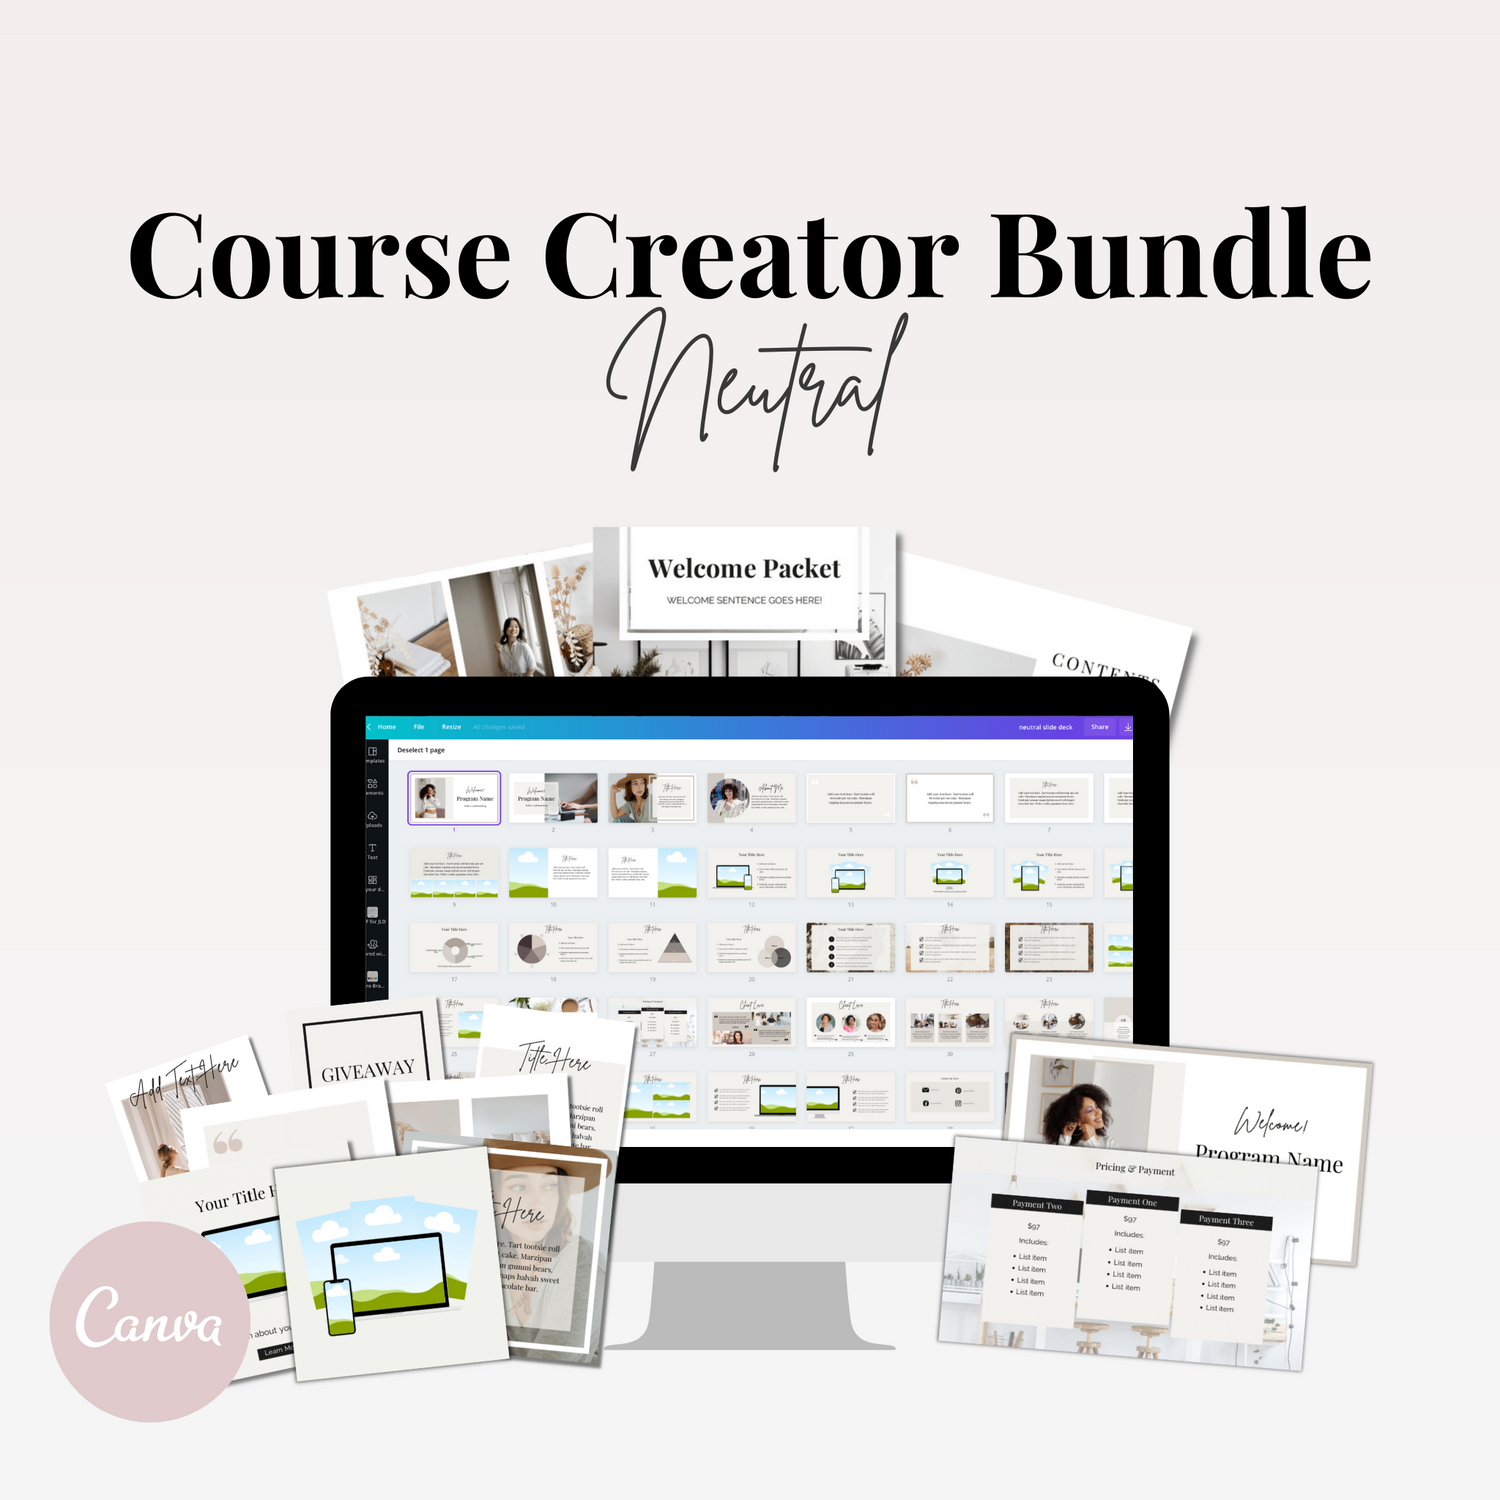 Neutral Canva template bundle for course creators. Customize for free in Canva. Package includes social media templates, lead magnet, workbook templates, and slide deck templates in a dreamy neutral aesthetic that will stop the scroll and convert clicks into clients. The Neutral Canva template package is completely done-for-you and perfect for busy entrepreneurs and service providers. 